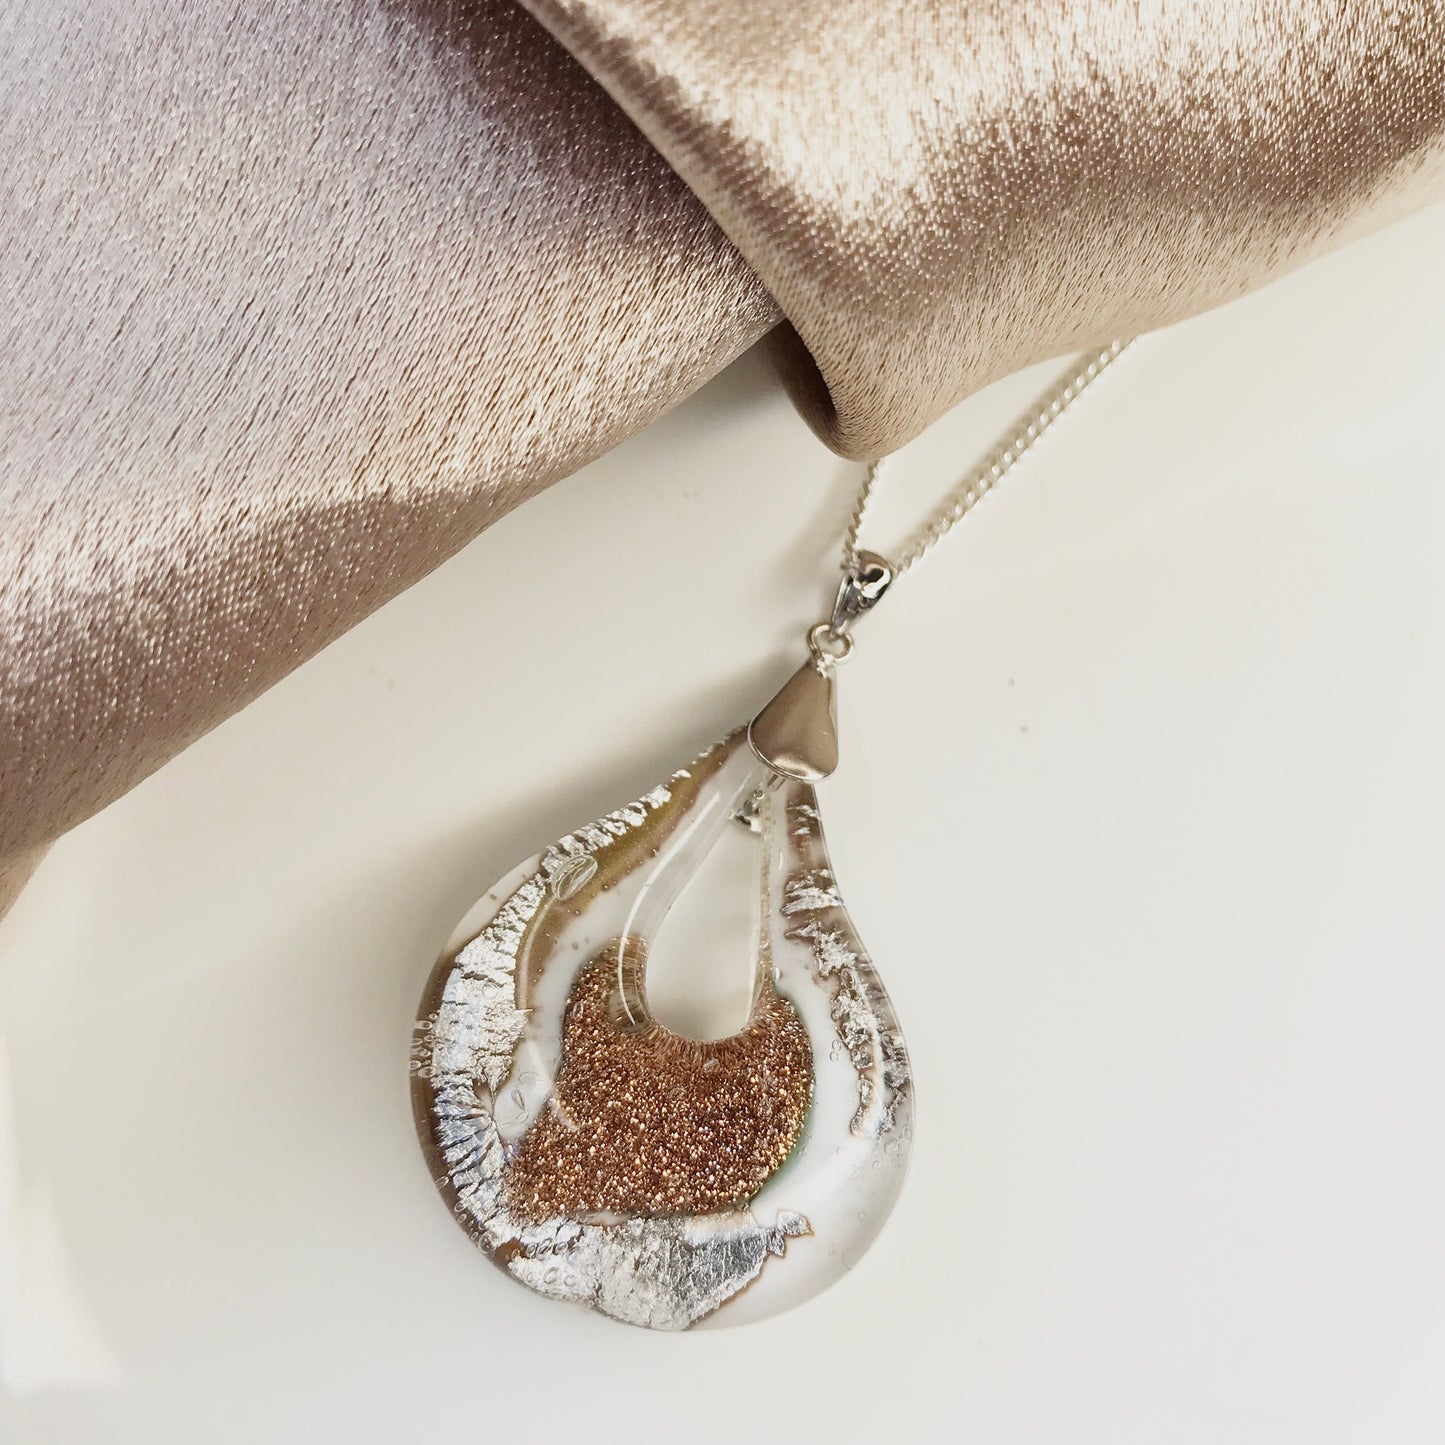 Real Murano glass necklace gold and white pendant teardrop pear shaped